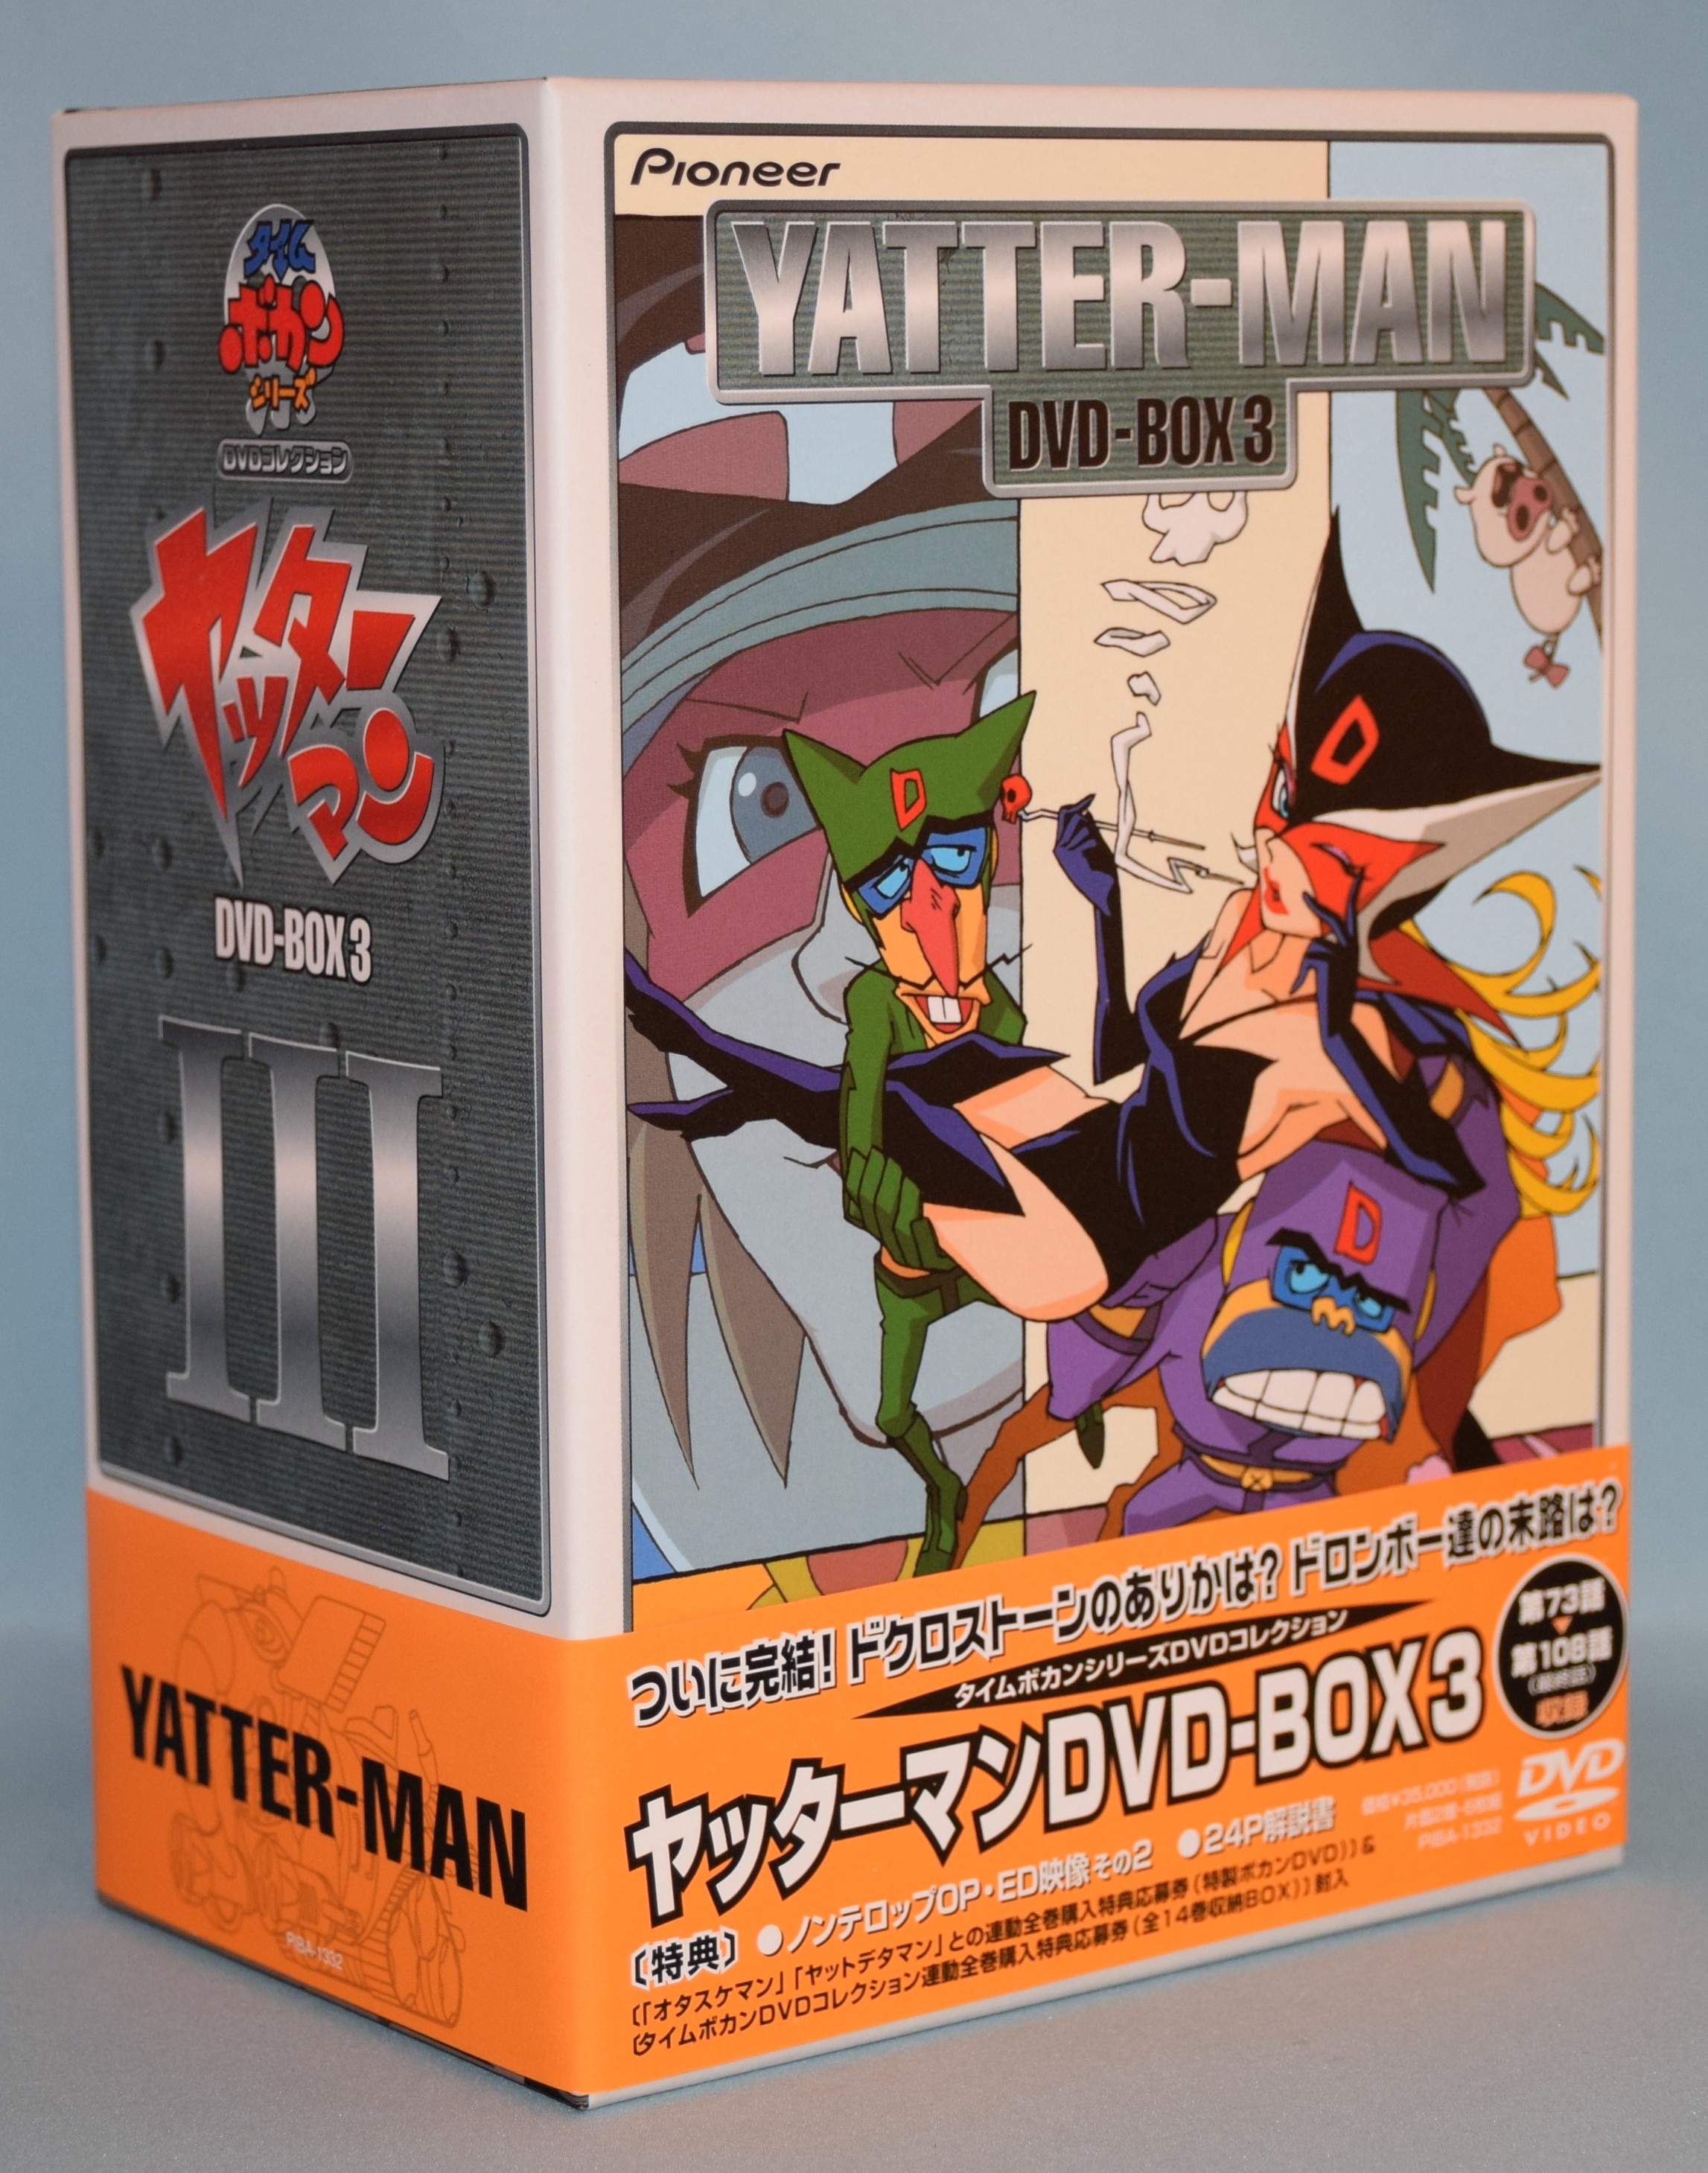 Yatterman Dvd Box 3 First Edition Limited Edition Disc Not Opened Mandarake Online Shop